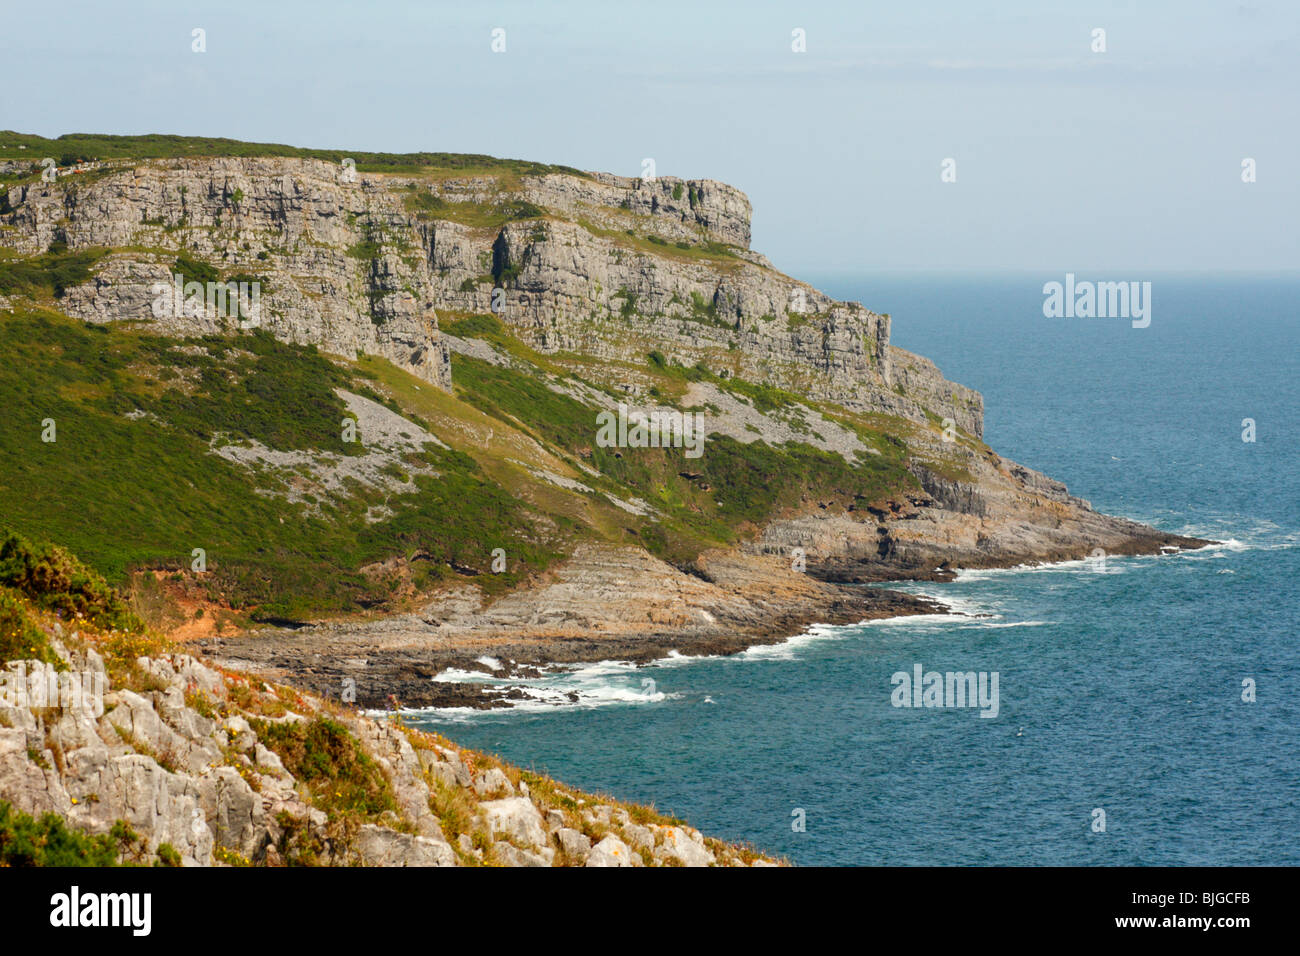 View looking East towards Pwll Du Head from Pennard Cliffs, Gower Peninsula, south Wales, U.K. Stock Photo